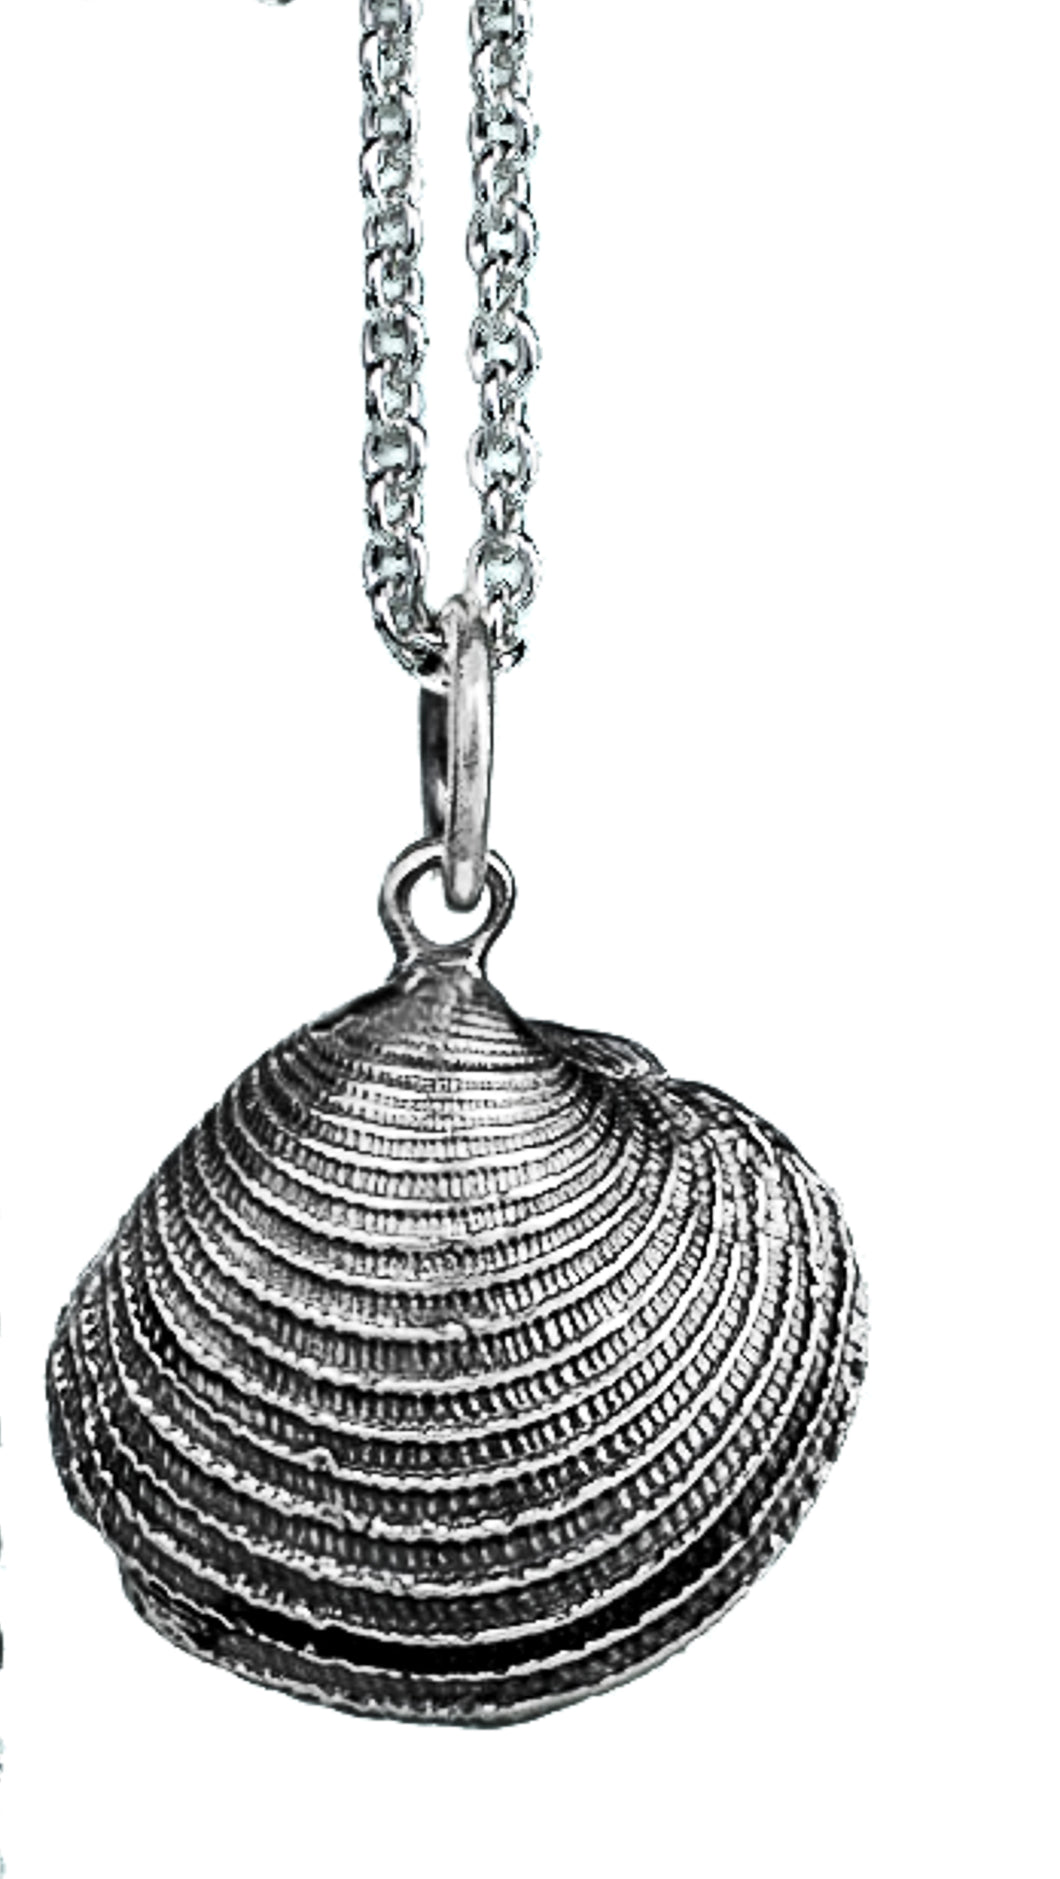 silver cast venus clam shell necklace oxidized finish by hkm jewelry